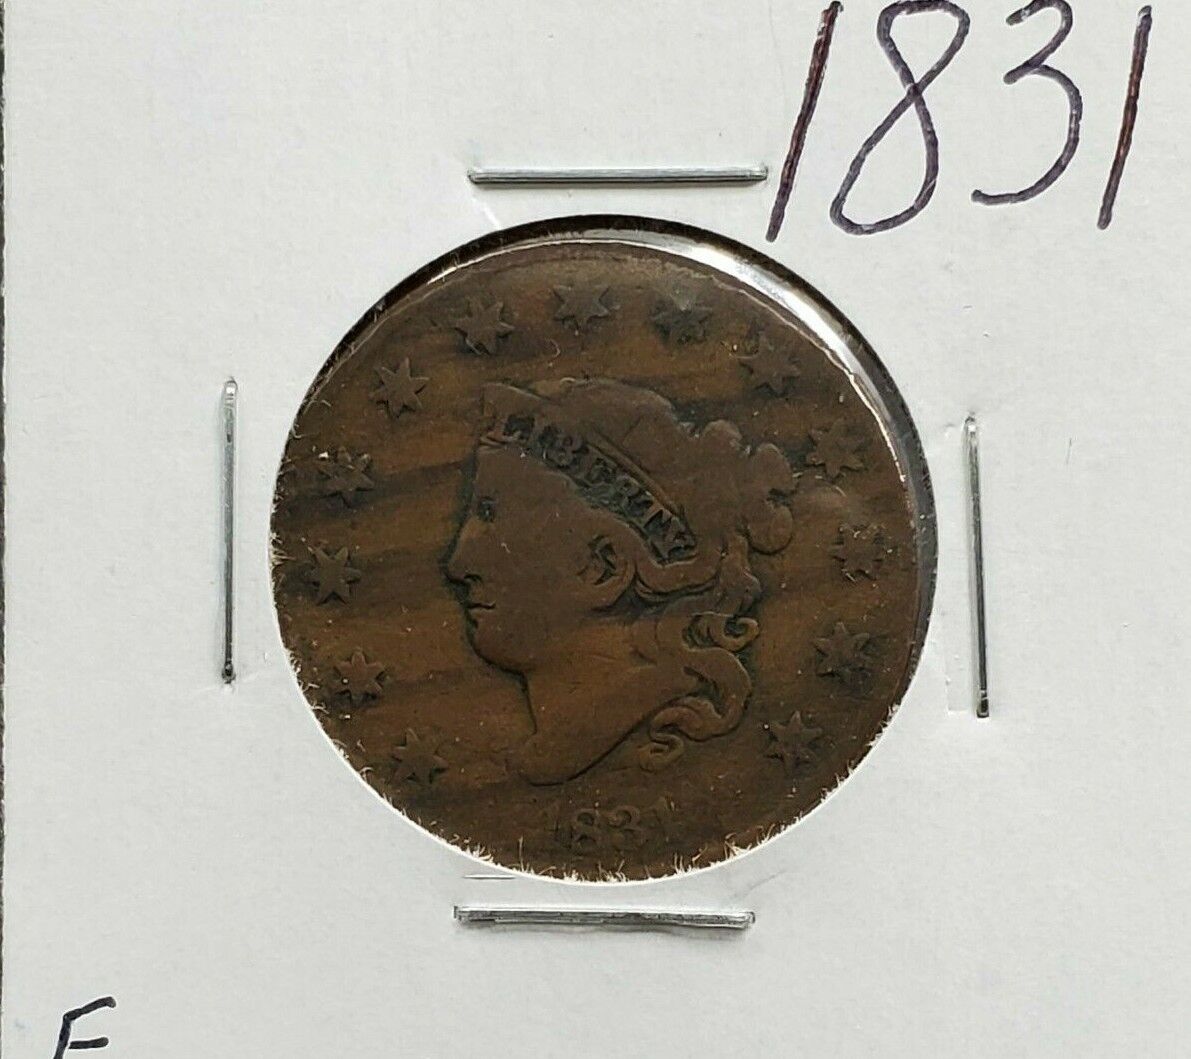 1831 Coronet Liberty Head US Large Cent 1c Choice VG / Fine Circulated Condition